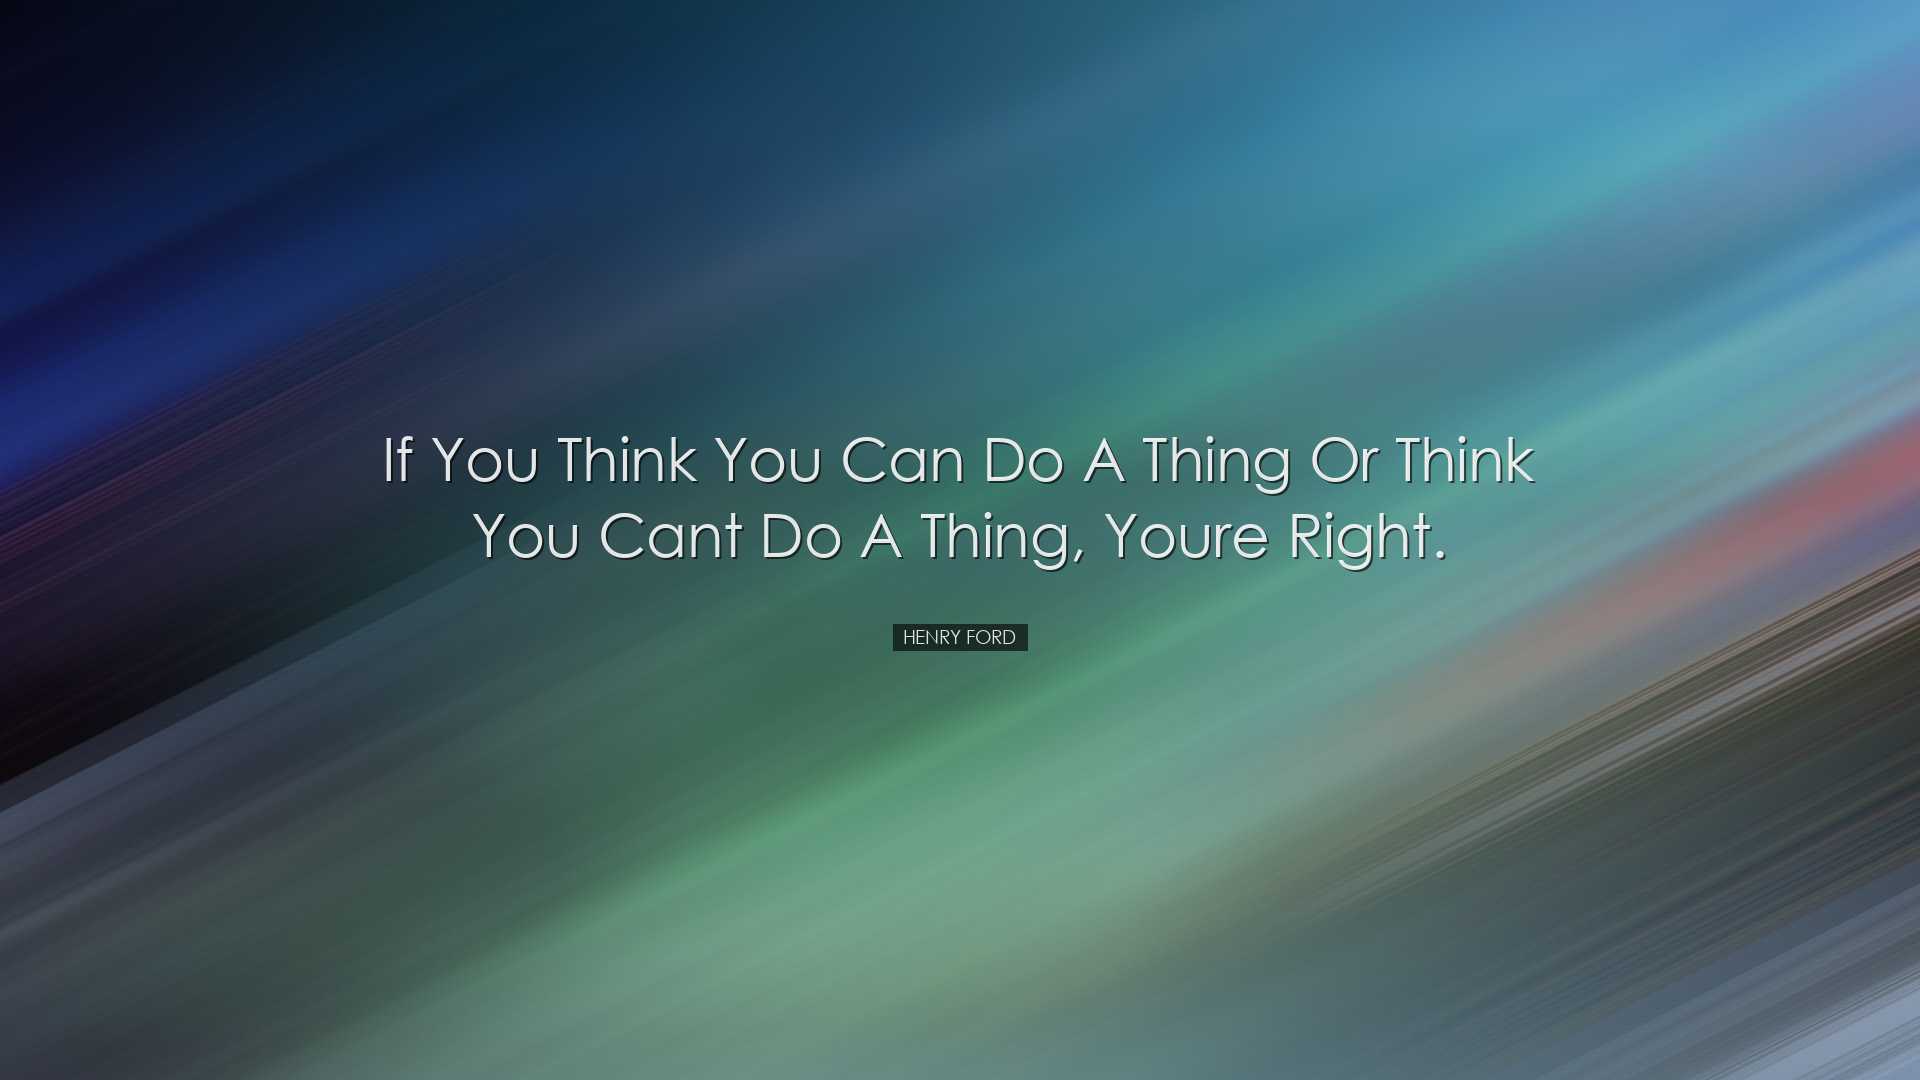 If you think you can do a thing or think you cant do a thing, your